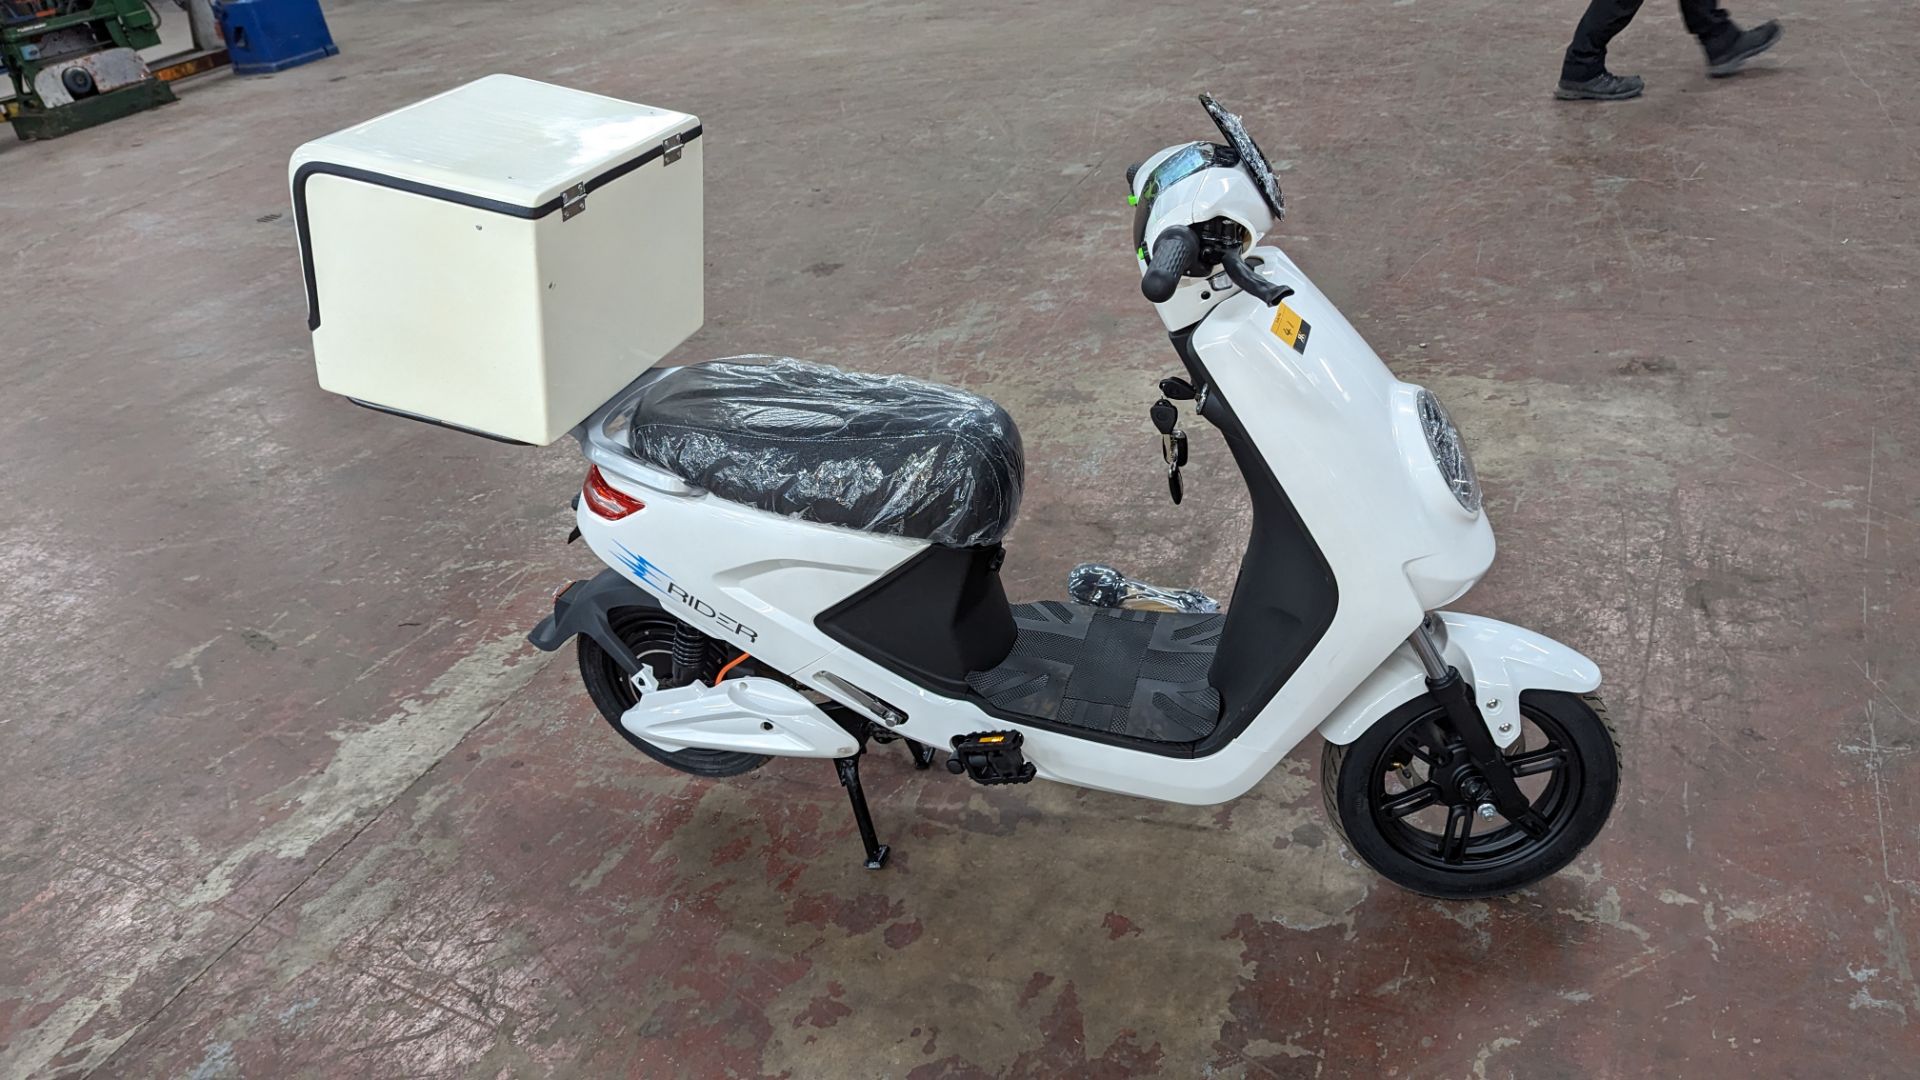 Model 18 Electric Bike: Zero (0) recorded miles, white body with black detailing, insulated box moun - Image 5 of 11